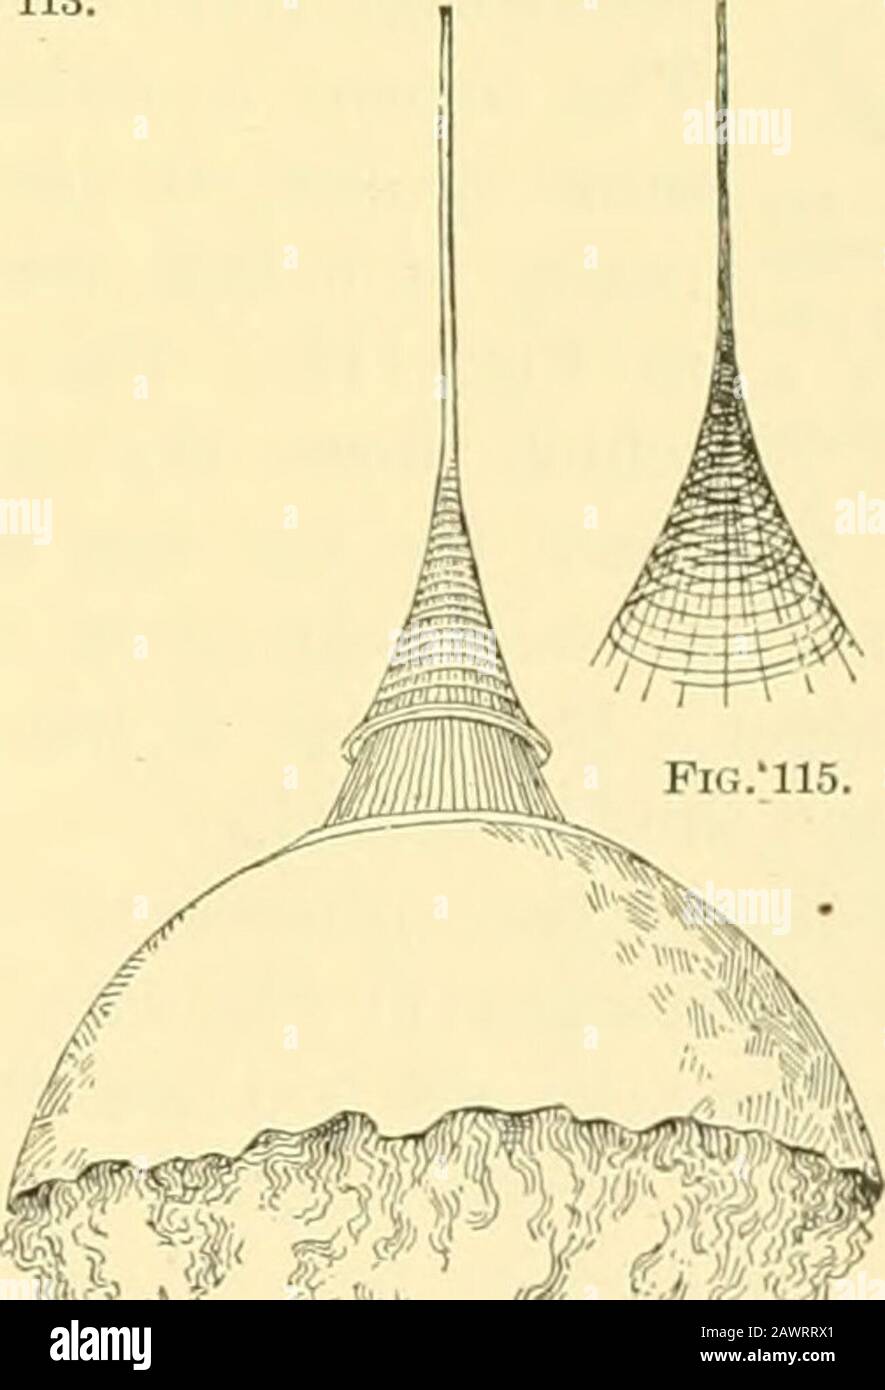 American spiders and their spinningworkA natural history of the orbweaving spiders of the United States, with special regard to their industry and habits . Fig. 116.. J. Fig. 114. Fig. 112. Cocoon of Theridium frondeum, magnified. Fig. 113. The same, natural size, suspendedin natural site. Fig. 114. Cocoon of Argyrodes trigonum, much enlarged, to show the structure.Fig. 115. The spiral thread on the cap and stalk. Fig. 116. Cocoons of Ero variegata, twicenatural size. (After Blackwall.) IIG AMERICAN SPIDERS AXD THEIR SPINNINGWORK. variegatum), a little sj^idpi ot uncommon in England, which wou Stock Photo